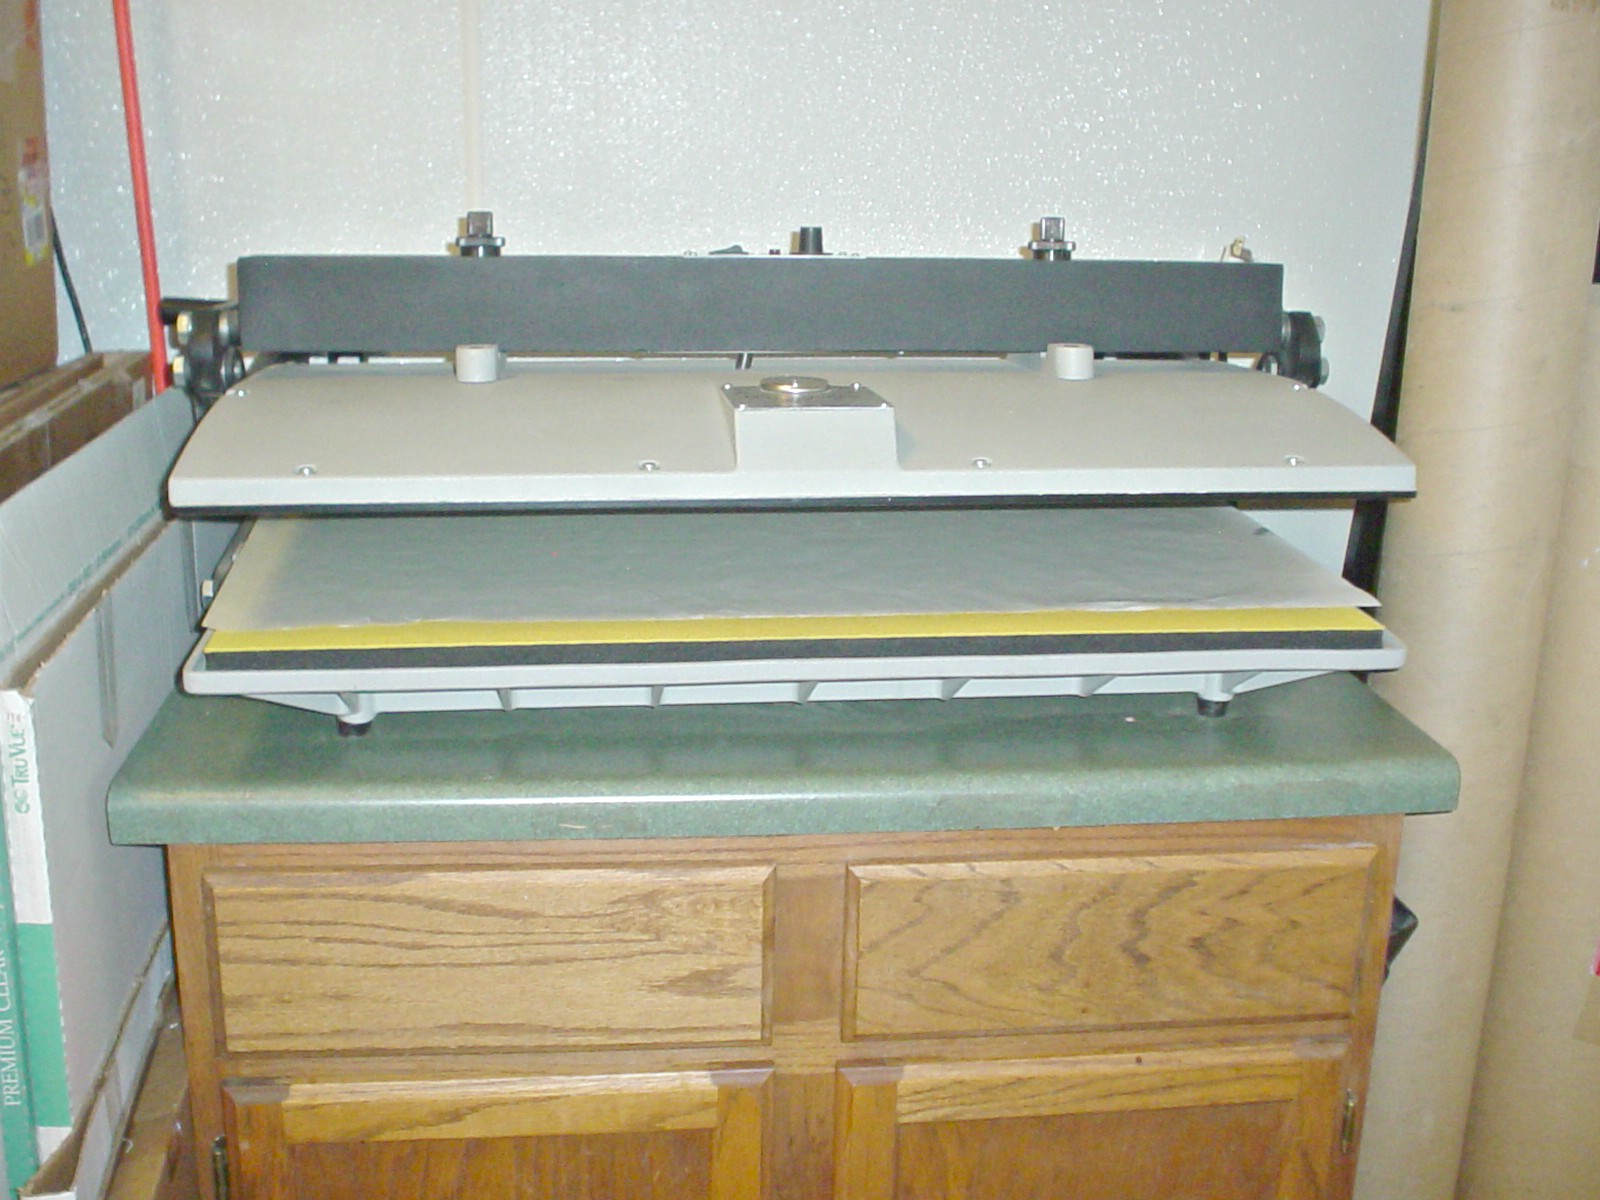 Picture Framing Equipment Lot (used) Item # AGFS-67 (Illinois)